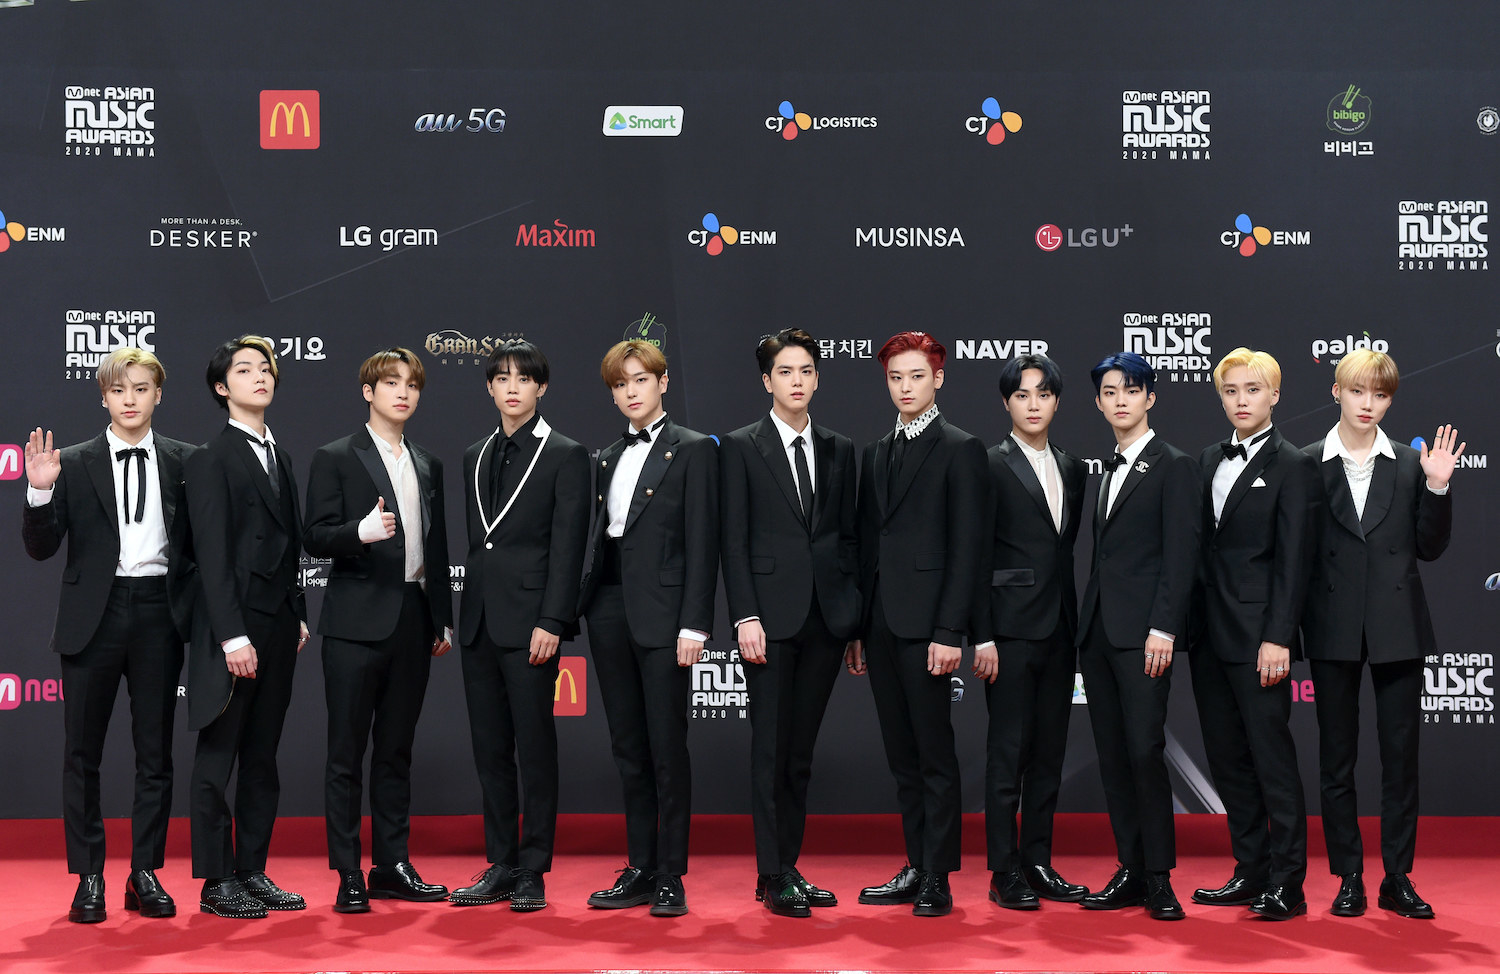 The Boys, wearing suits, attend the 2020 Mnet Asian Music Awards